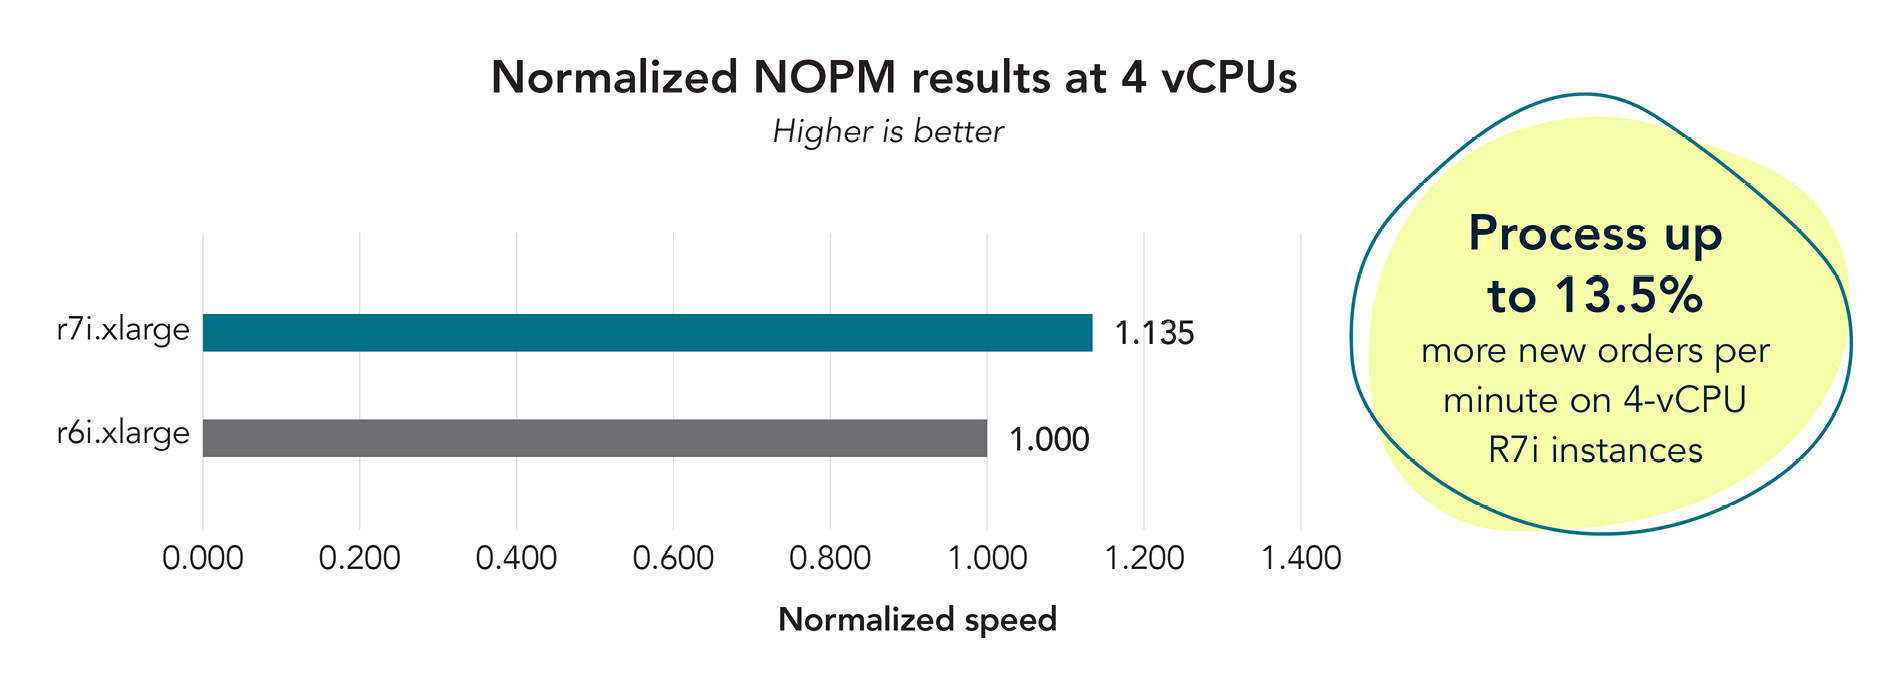 Bar graph showing the normalized results at 4 vCPUs. The r7i.xlarge instance achieved 13.5 percent more new orders per minute. 